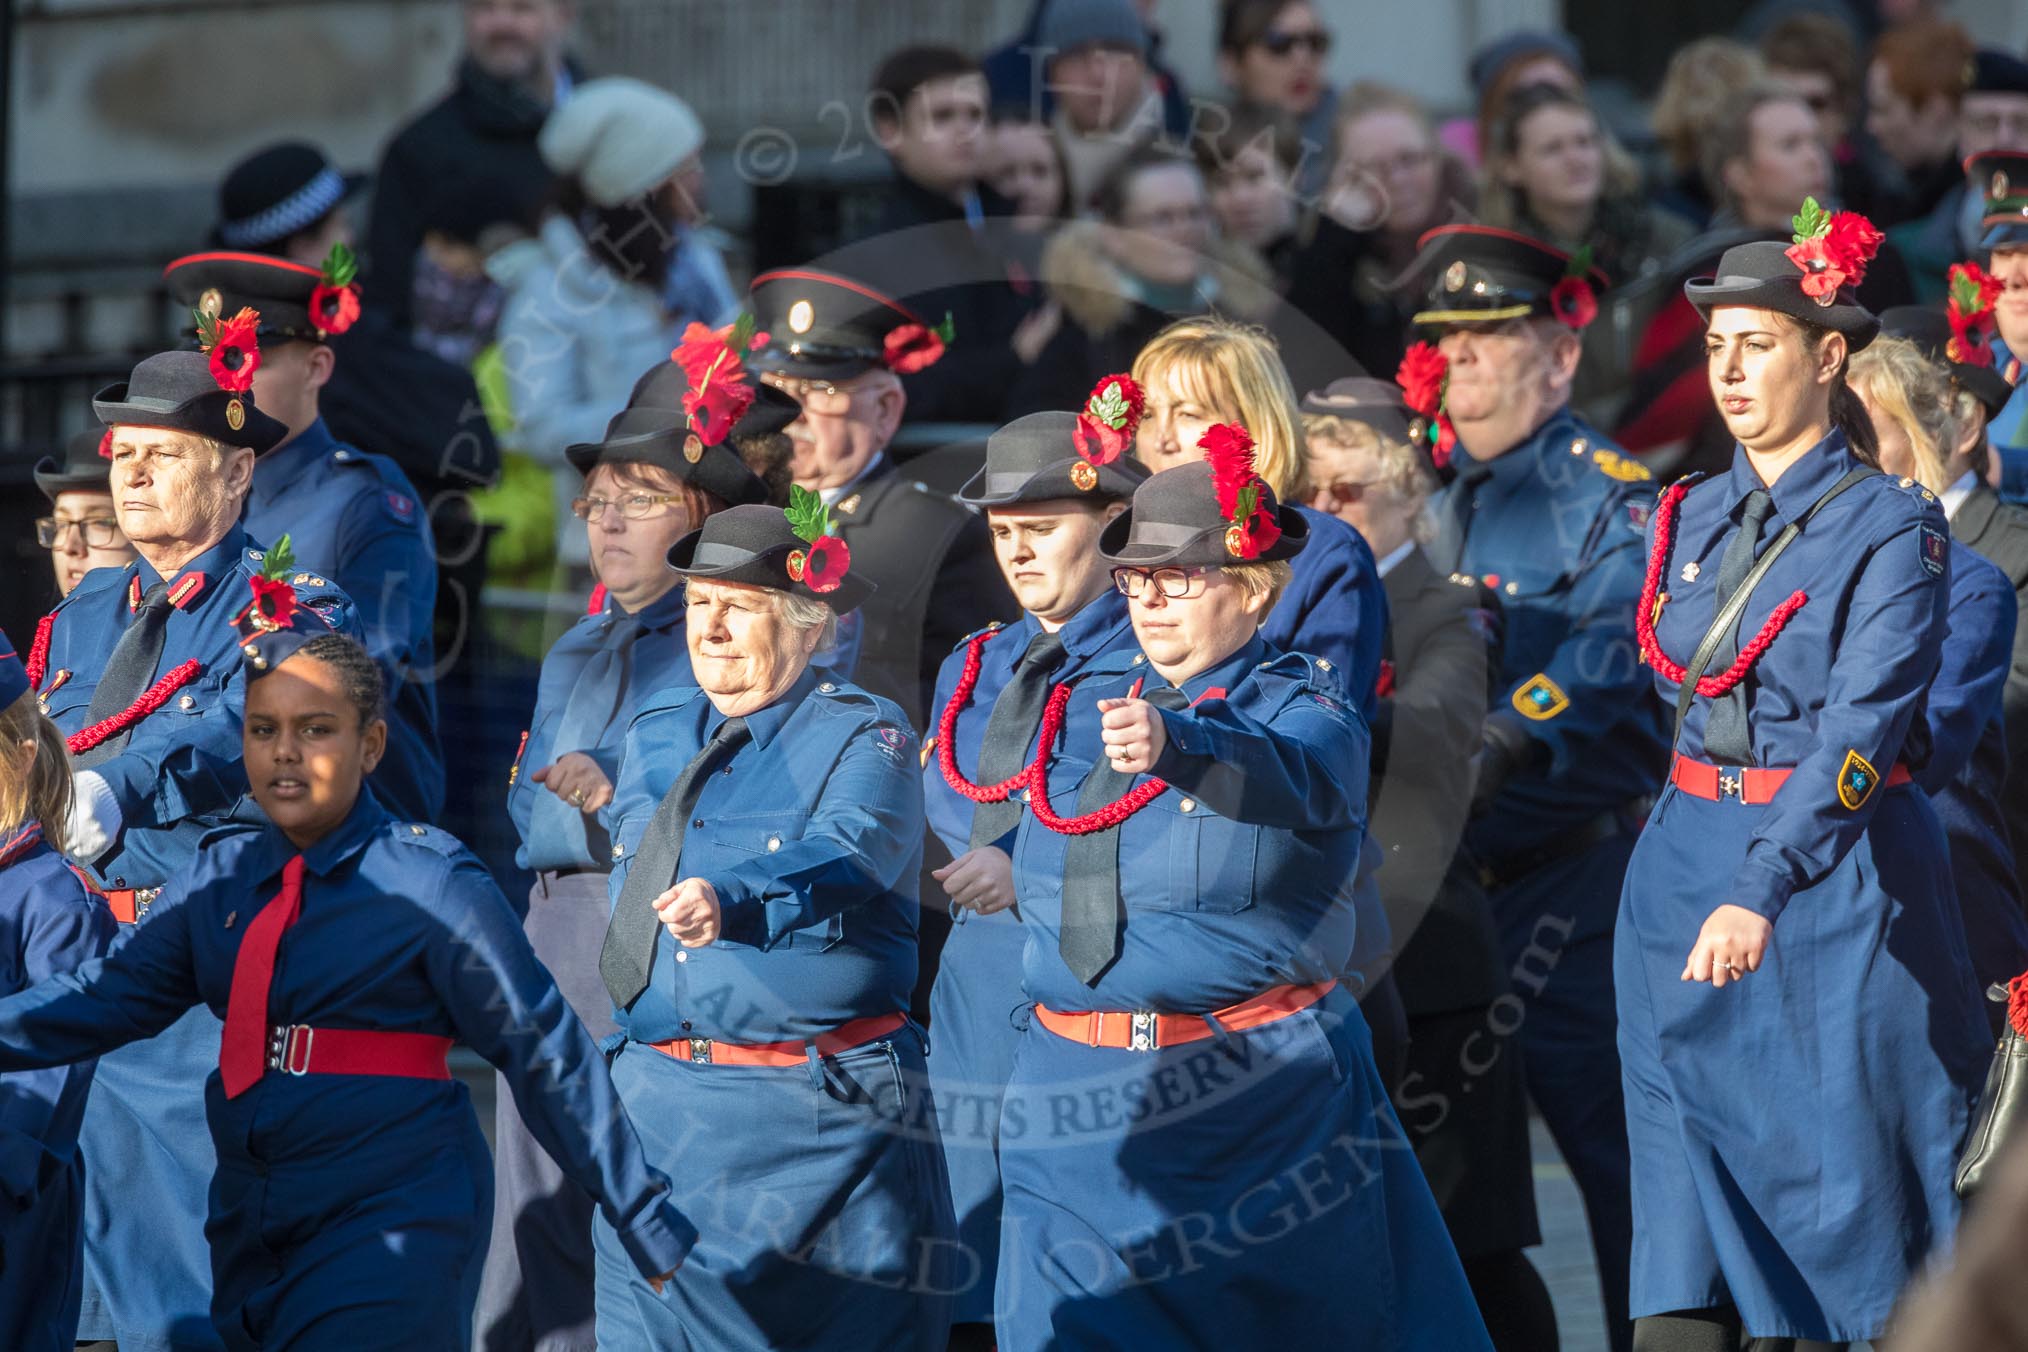 March Past, Remembrance Sunday at the Cenotaph 2016: M36 Church Lads & Church Girls Brigade.
Cenotaph, Whitehall, London SW1,
London,
Greater London,
United Kingdom,
on 13 November 2016 at 13:19, image #2892